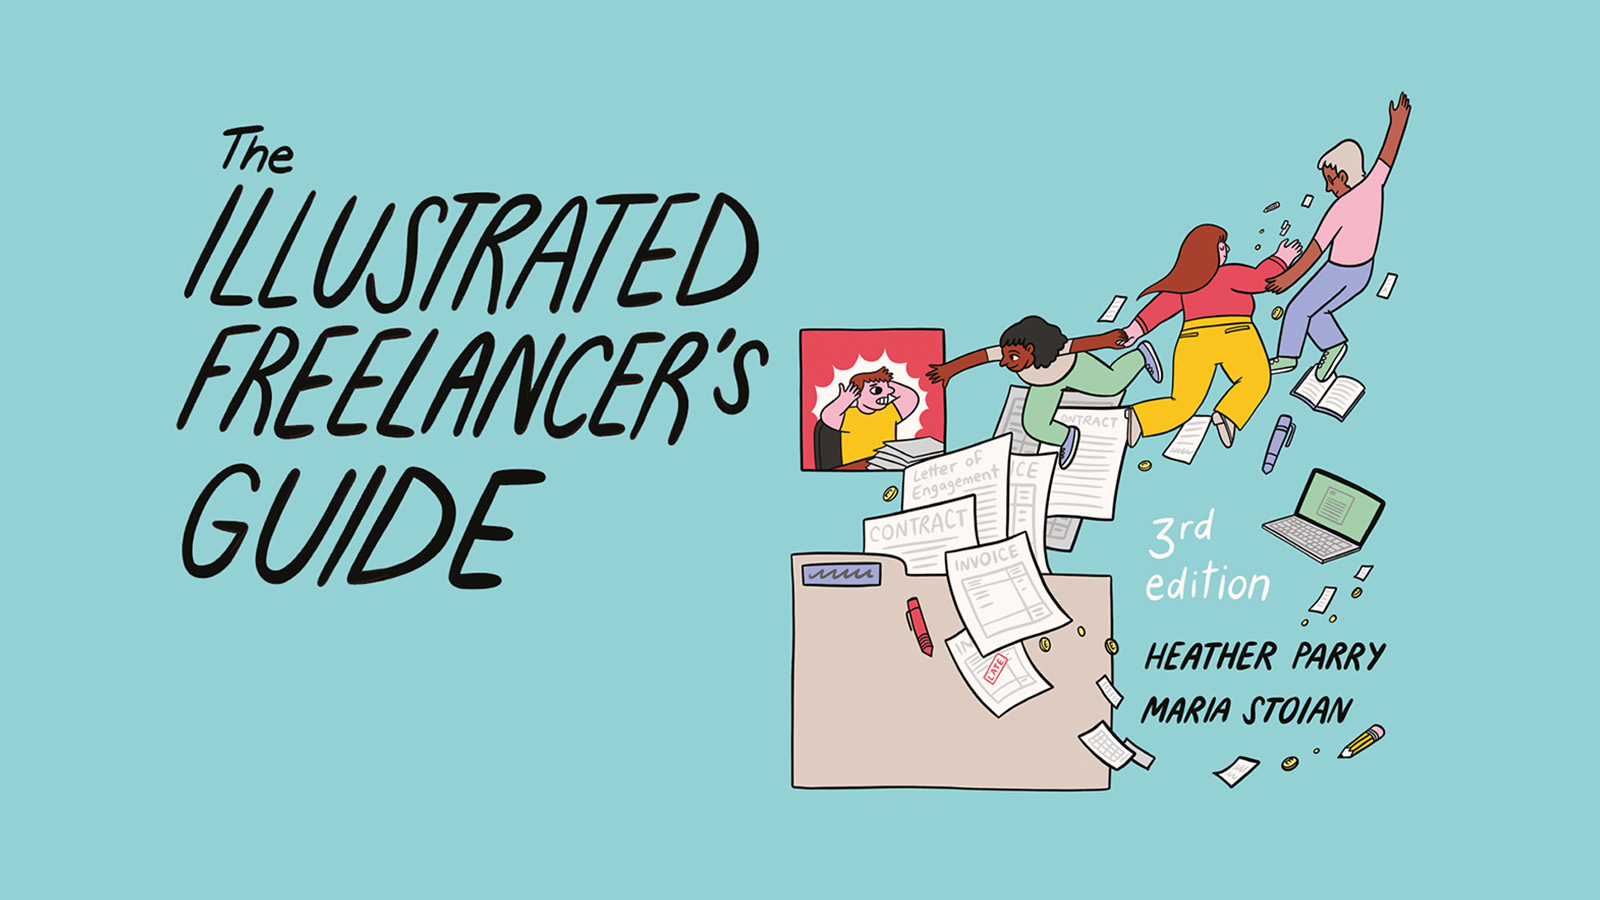 The Illustrated Freelancer's Guide 3rd edition